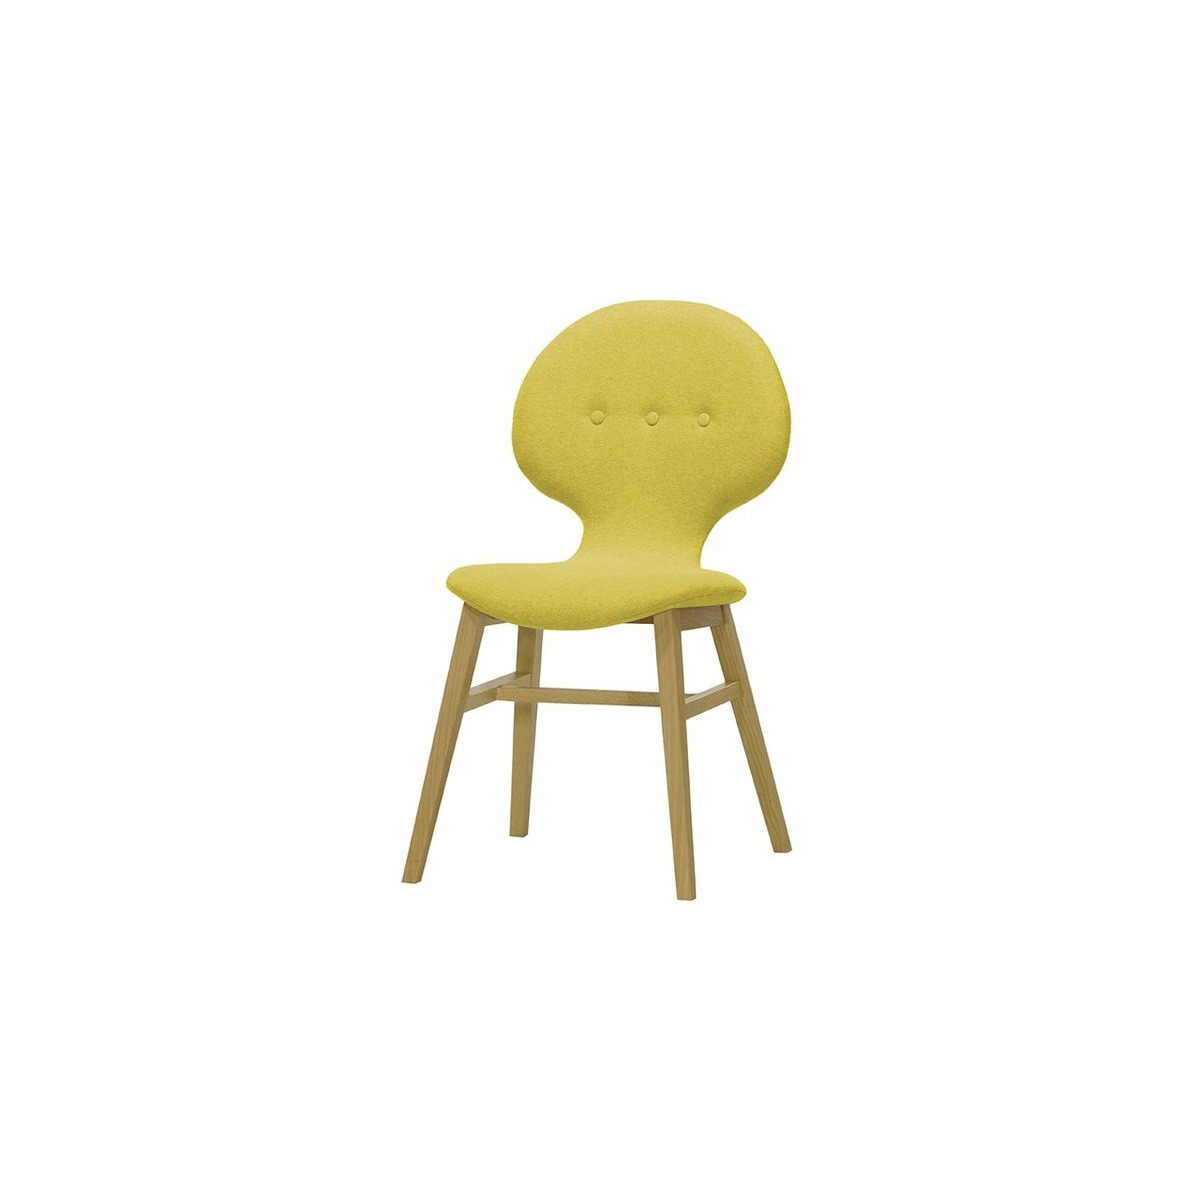 Altay Dining Chair, yellow, Leg colour: like oak - image 1